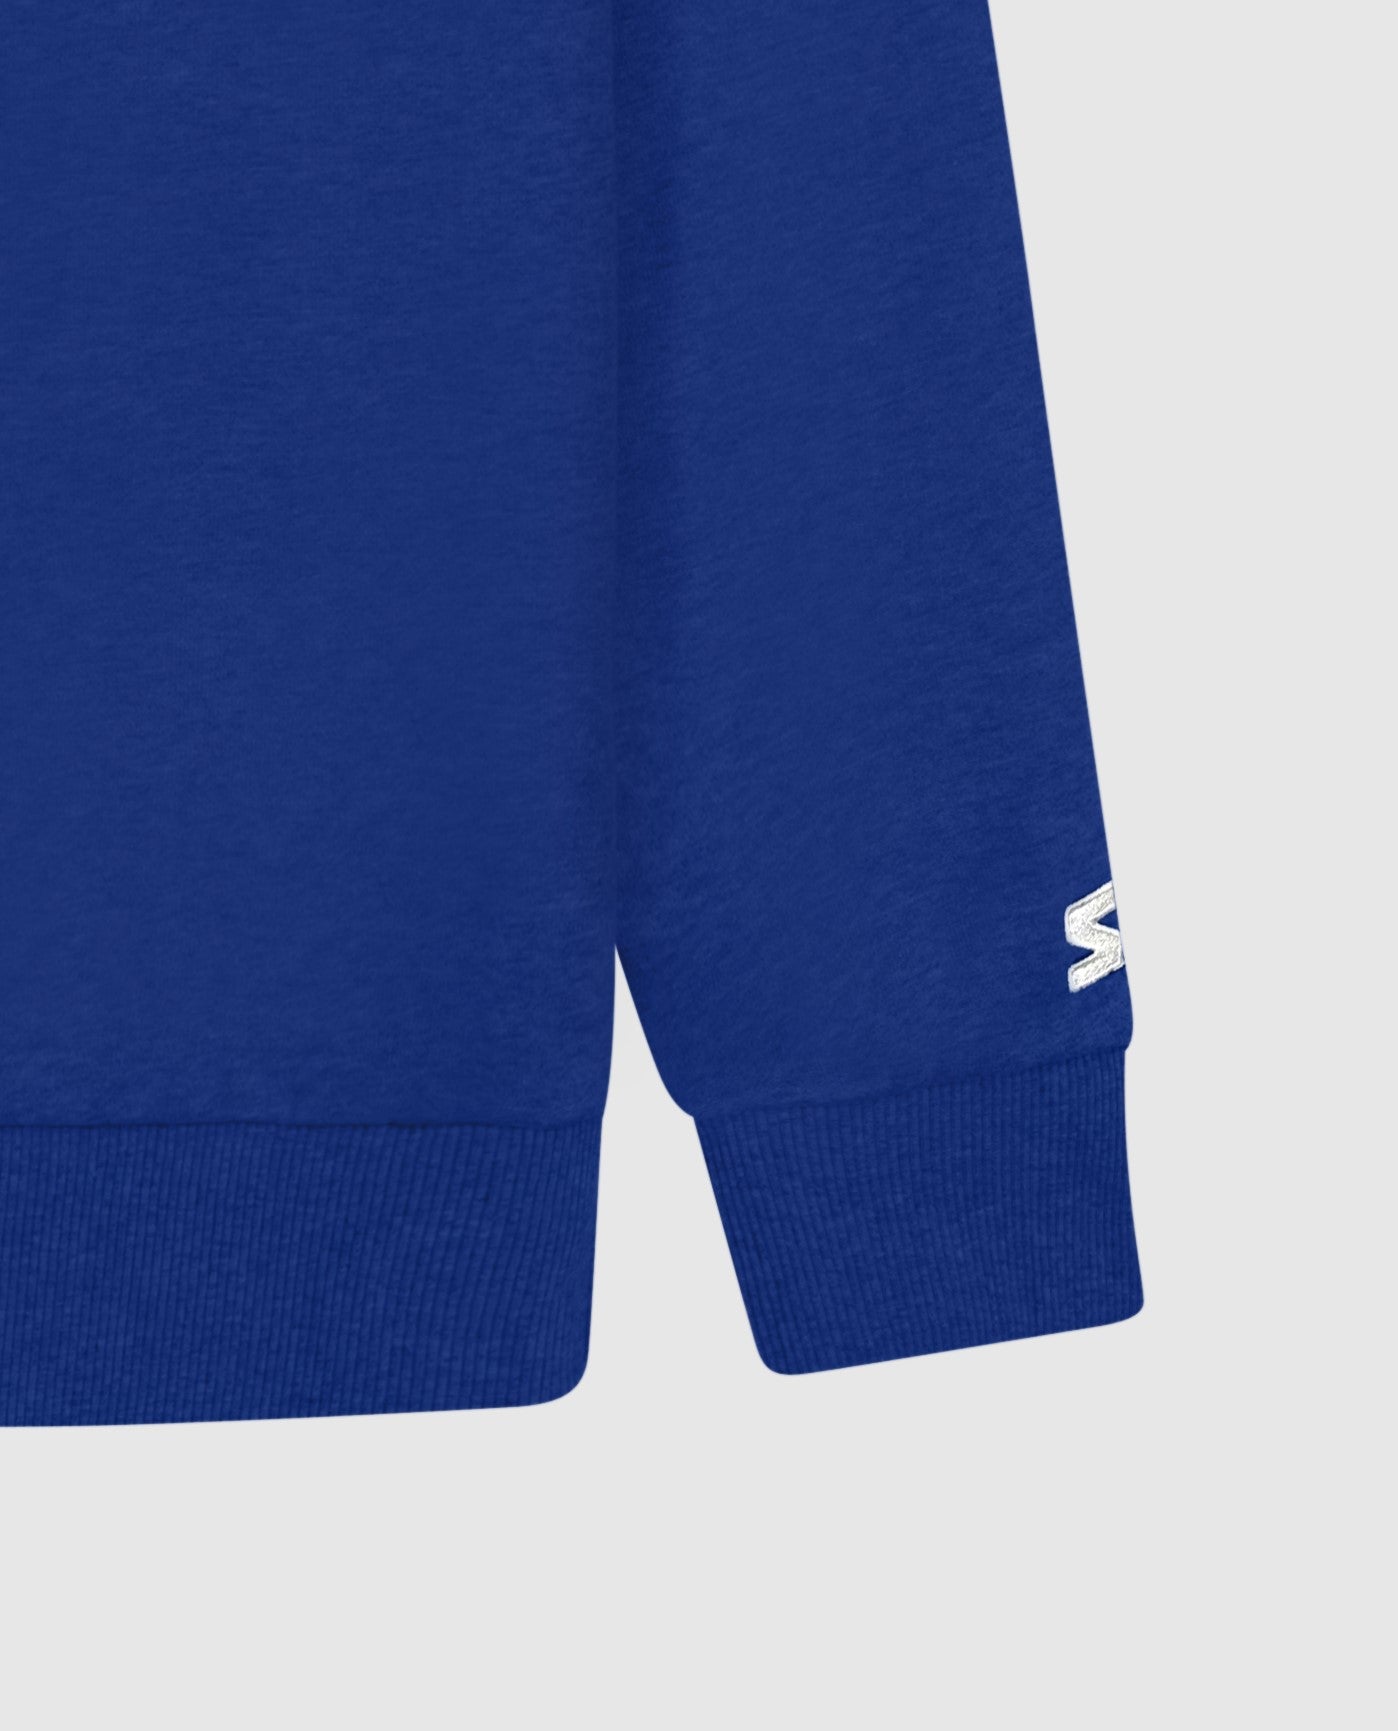 Sleeve Cuff Of New York Giants Jacquard Pullover Sweater | Giants Blue